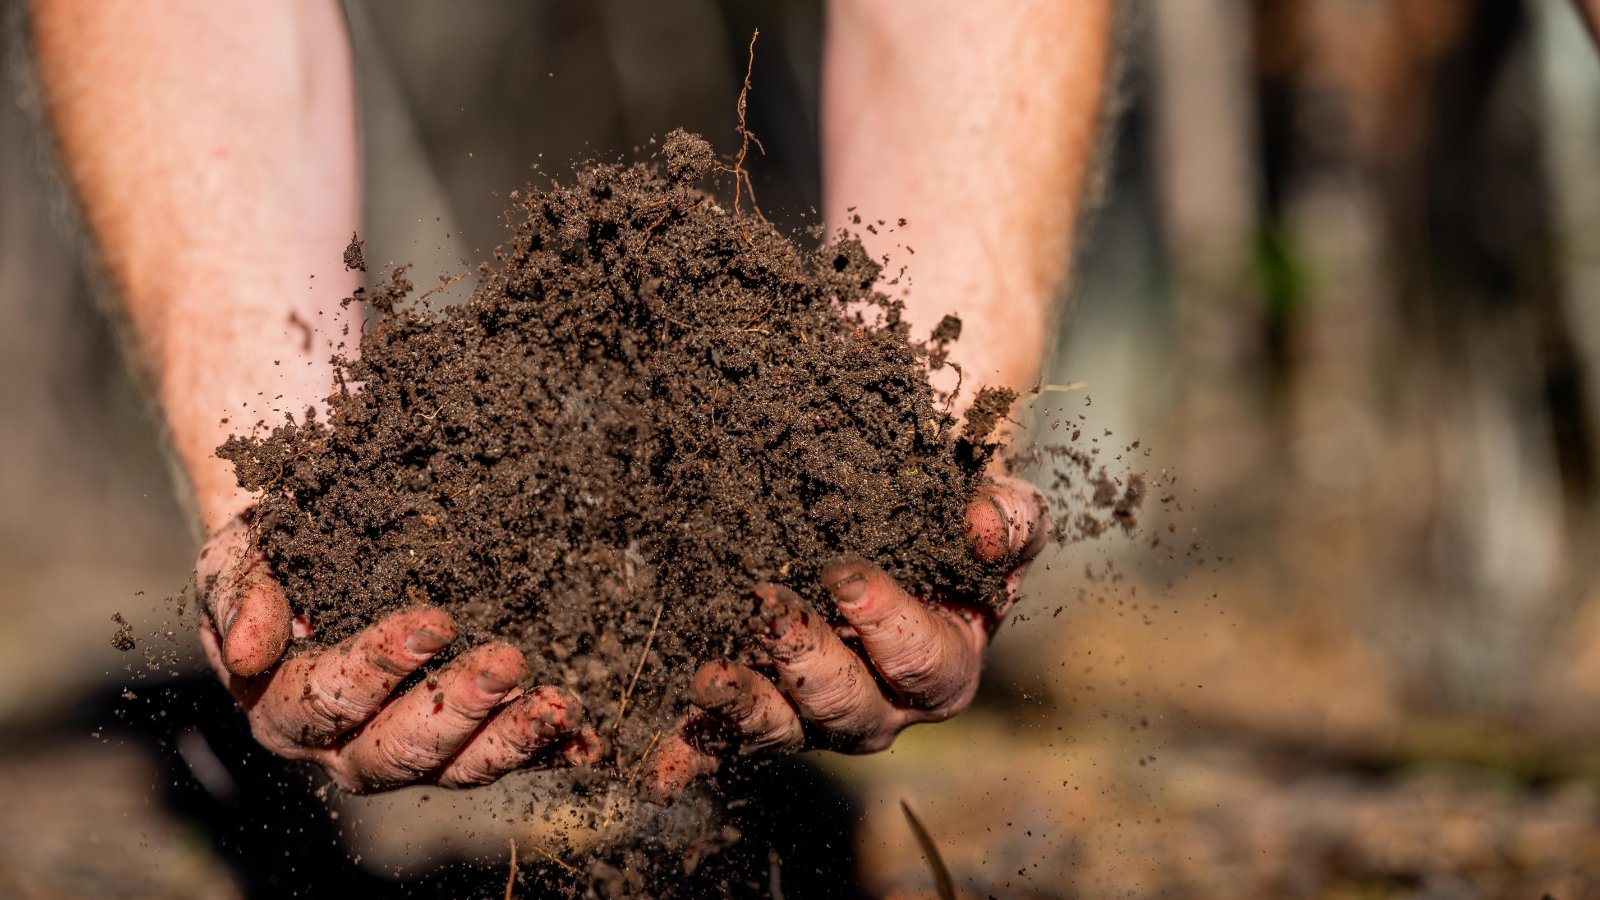 Close-up of a farmer's hands throwing fresh, loose, dark brown soil into the air in a sunny garden.